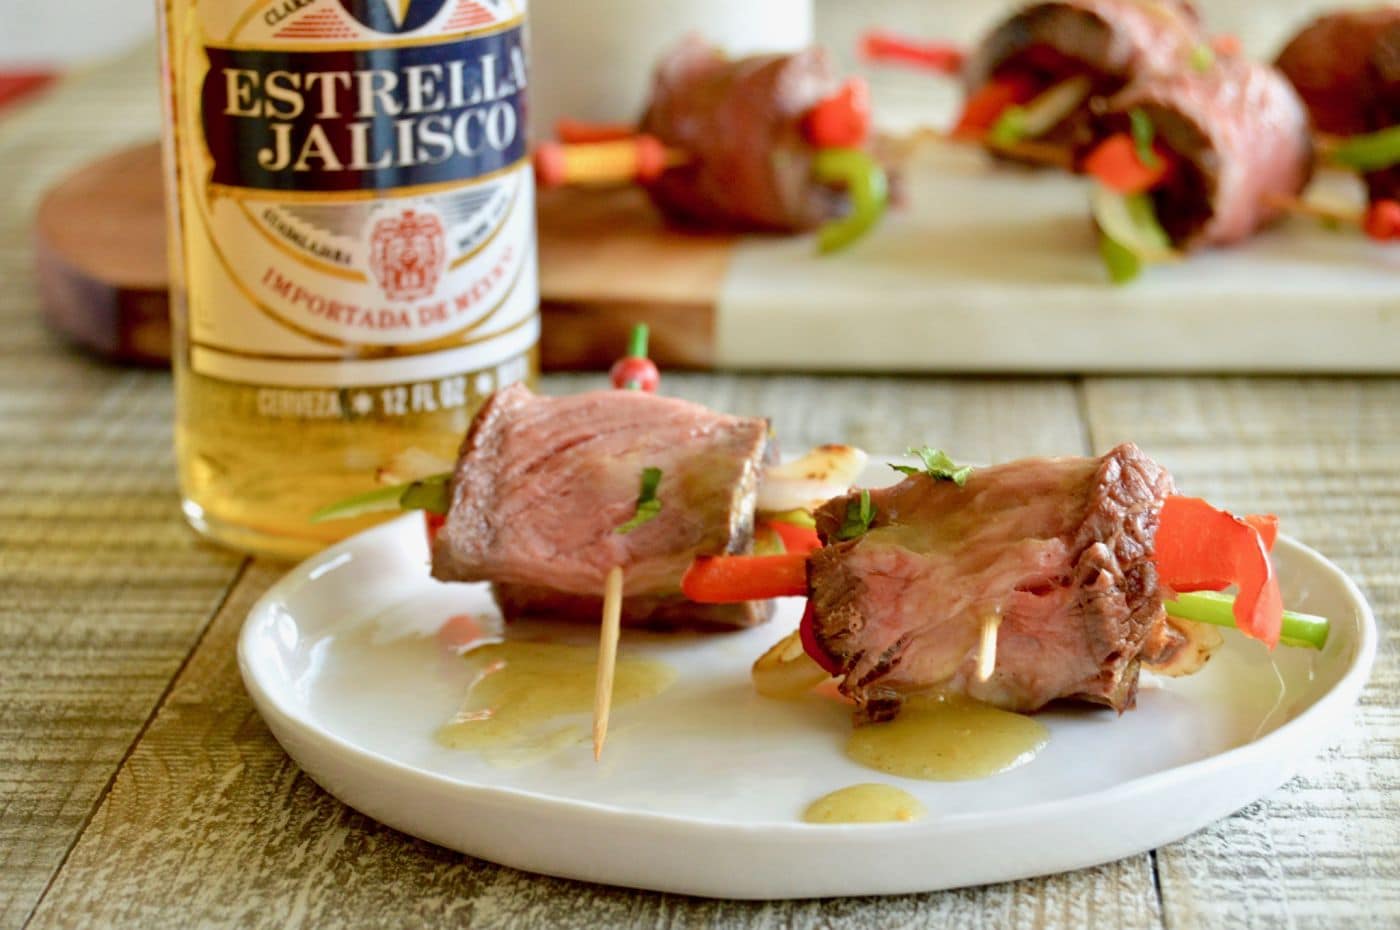 Easy Fajita Bite Appetizers are made with tender grilled steak, with softened peppers and onions all rolled into a bite sized treat.  Served with a simple salsa for maximum burst of flavor ready in less than 30 minutes for easy entertaining.